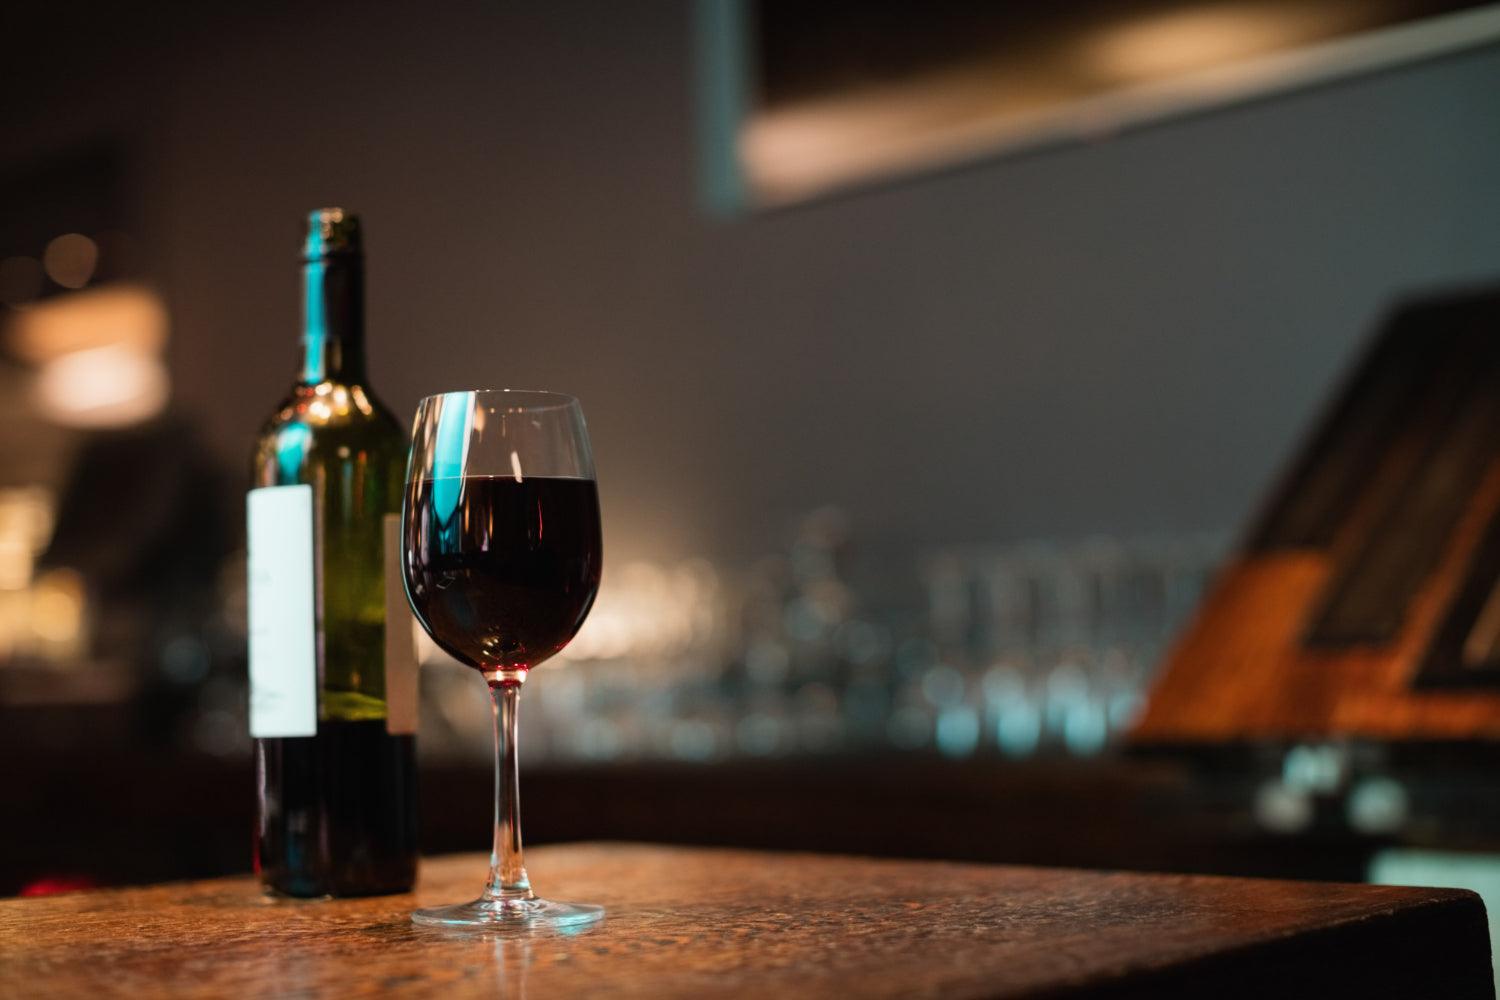 Red wine can be considered an aphrodisiac